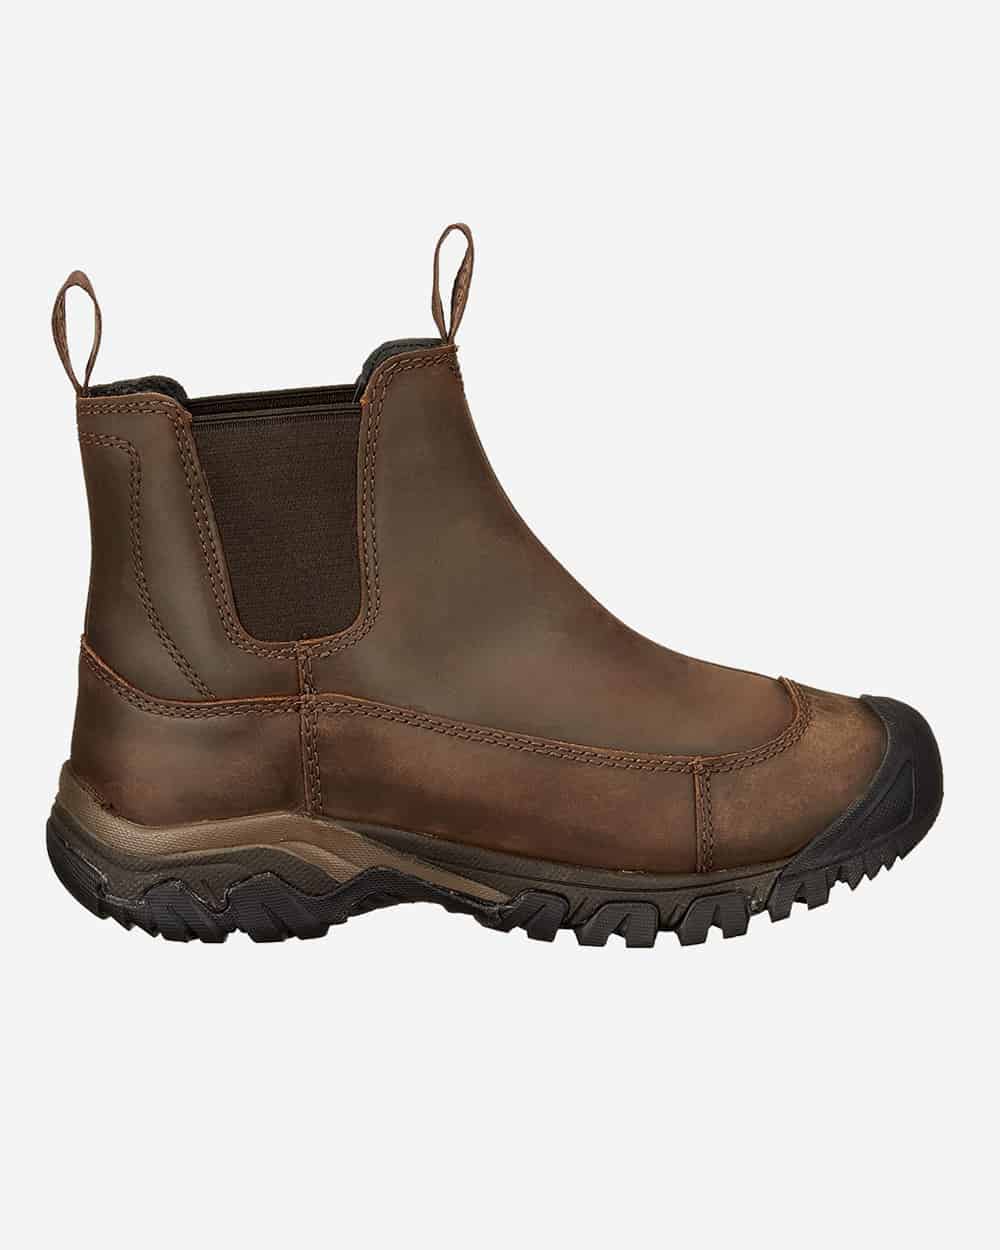 13 Best Slip-On Work Boots For On And Off Site (2023)